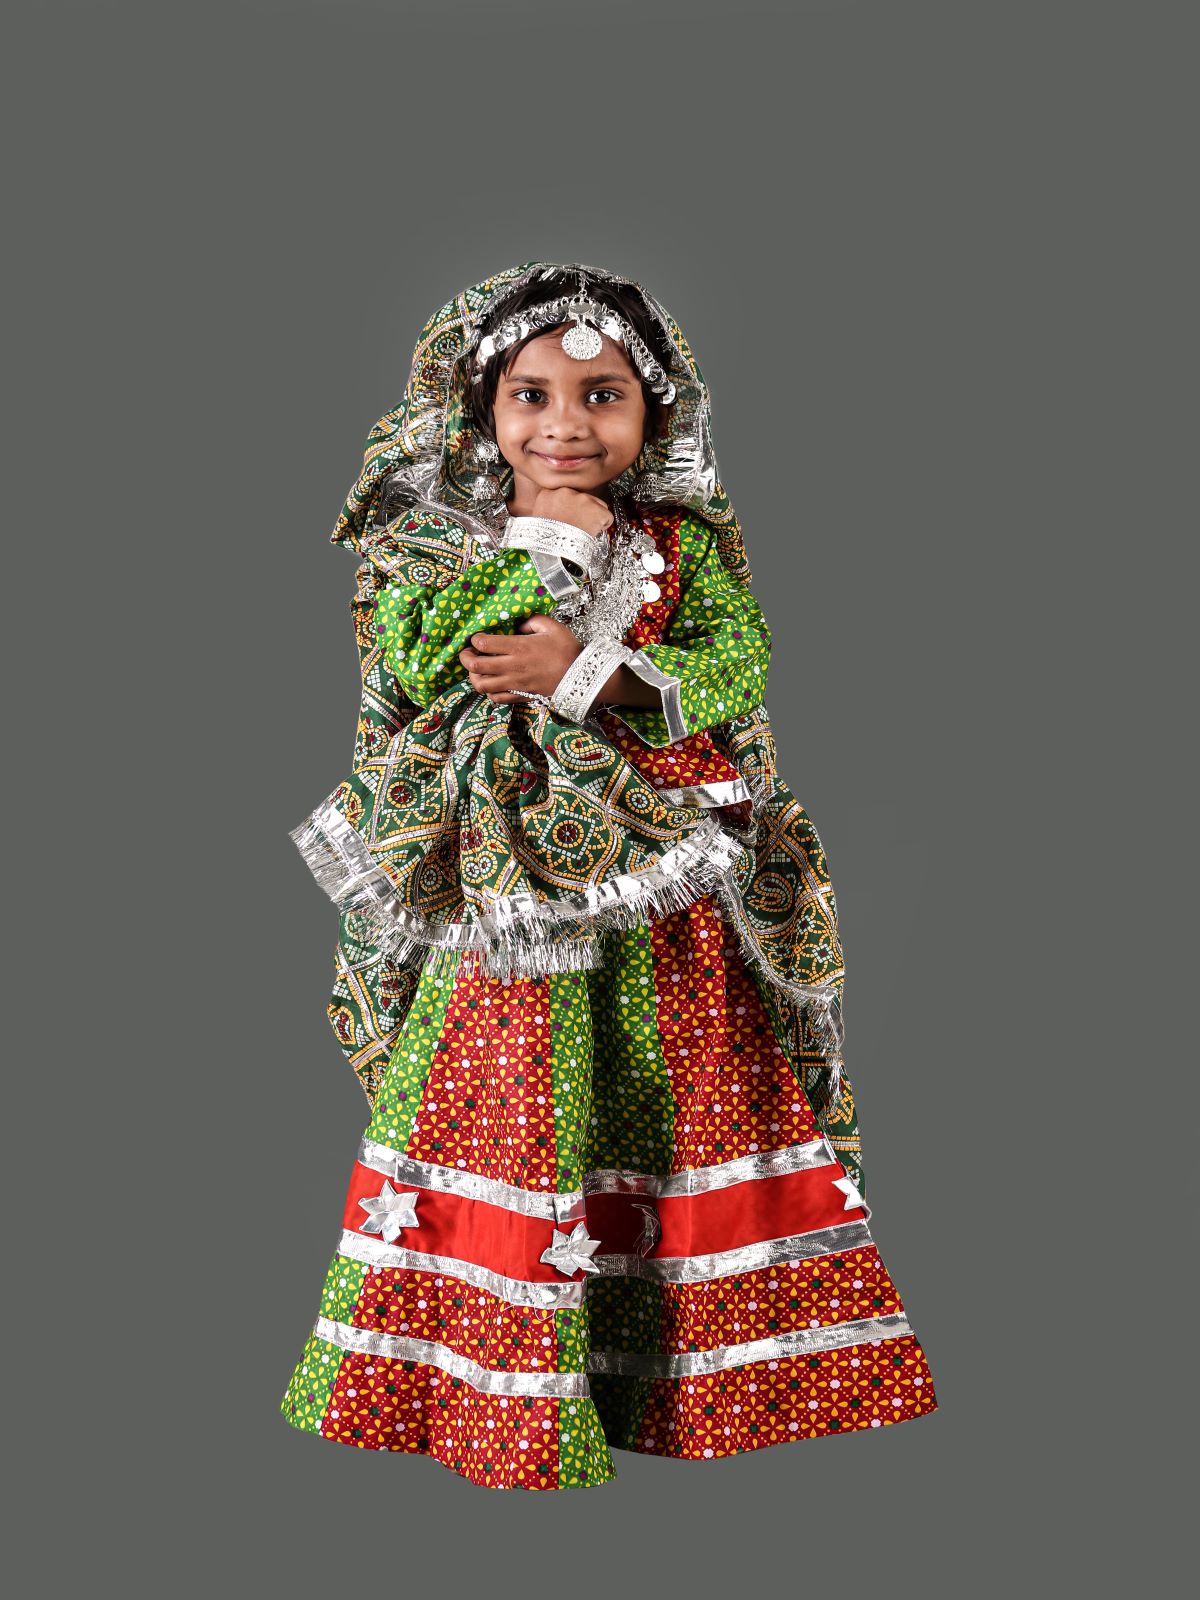 What are the the traditional dresses of different States of India? - Quora